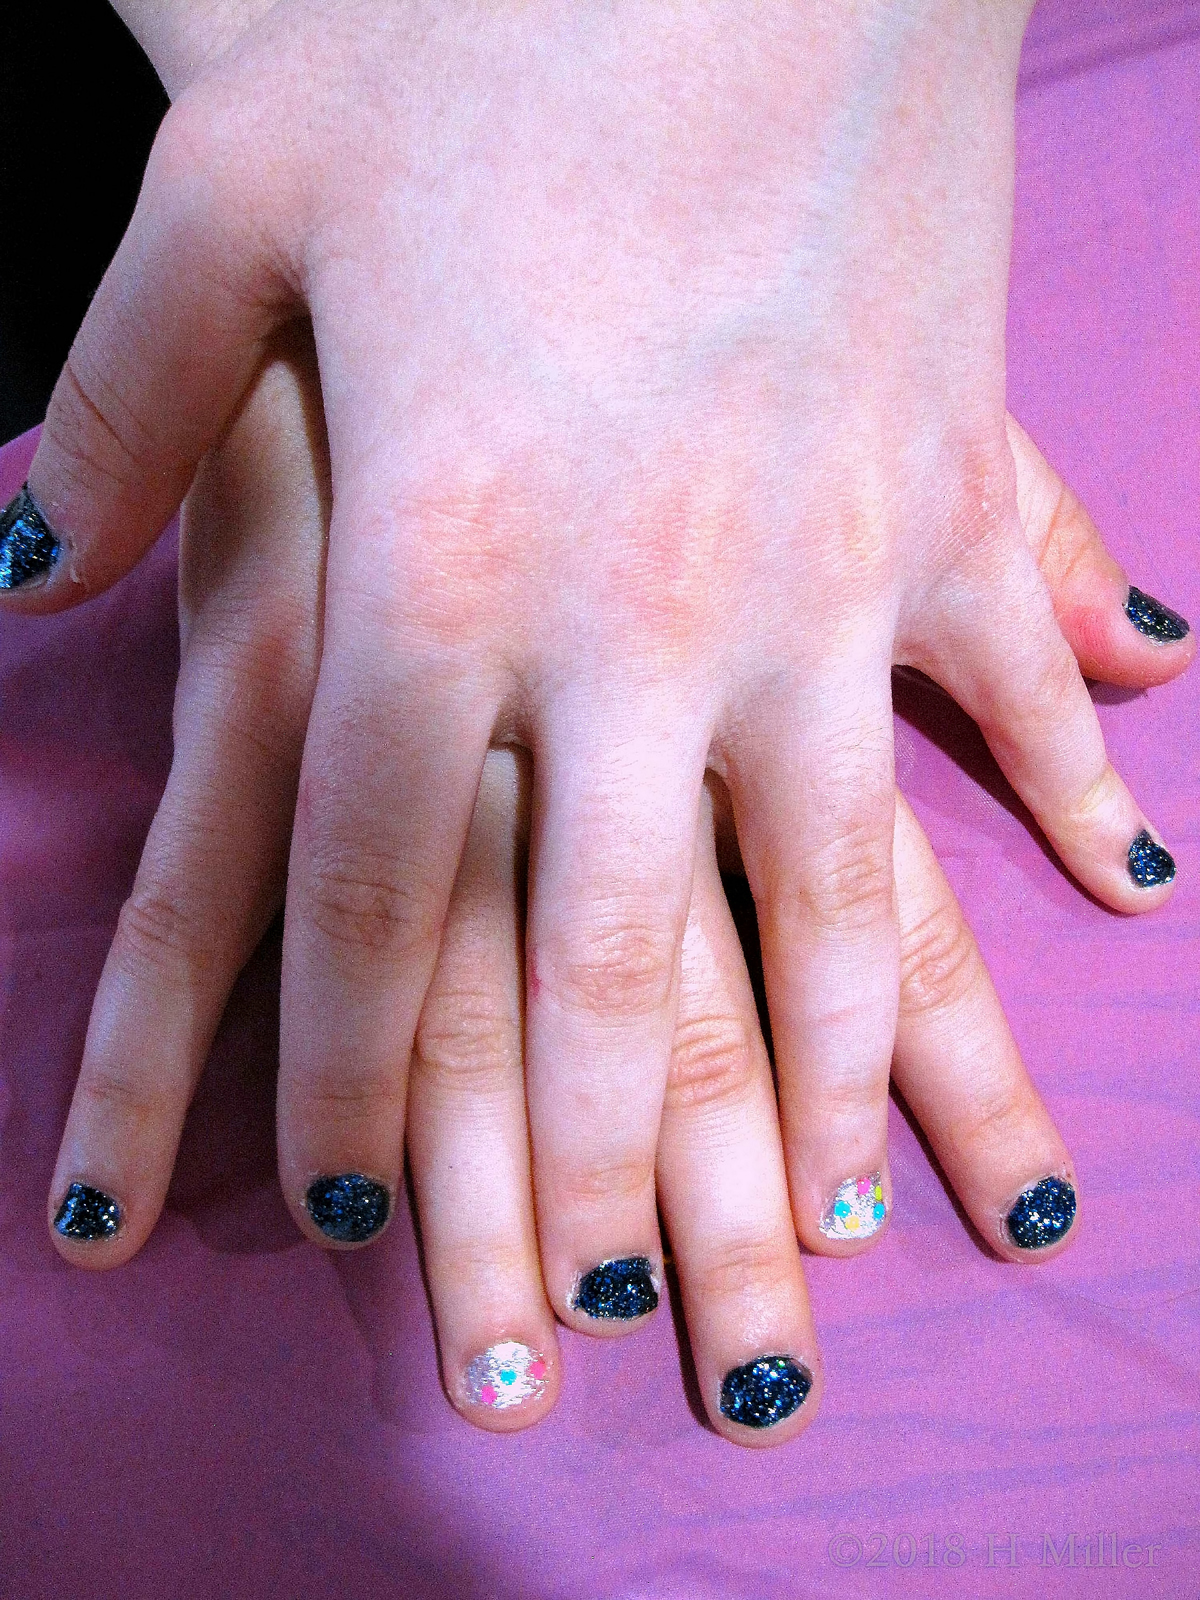 Pretty Sparkly Blue And White Girls Manicure With Rainbow Glitter. 